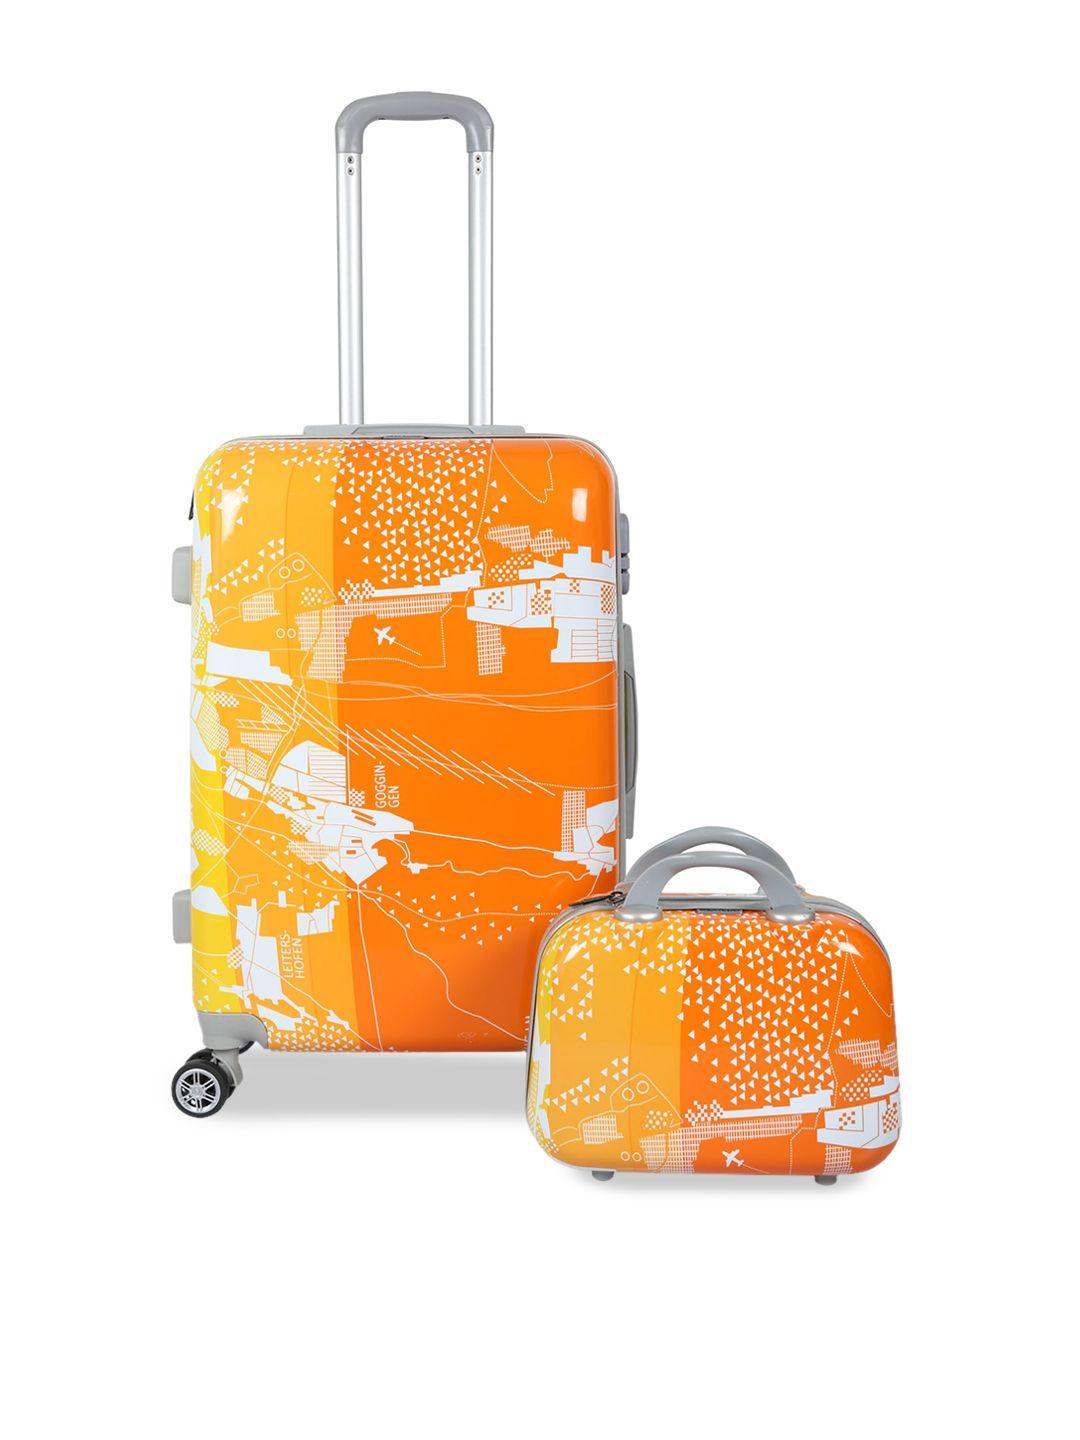 polo class unisex orange 20 inch luggage trolley bag with 1pc vanity bag